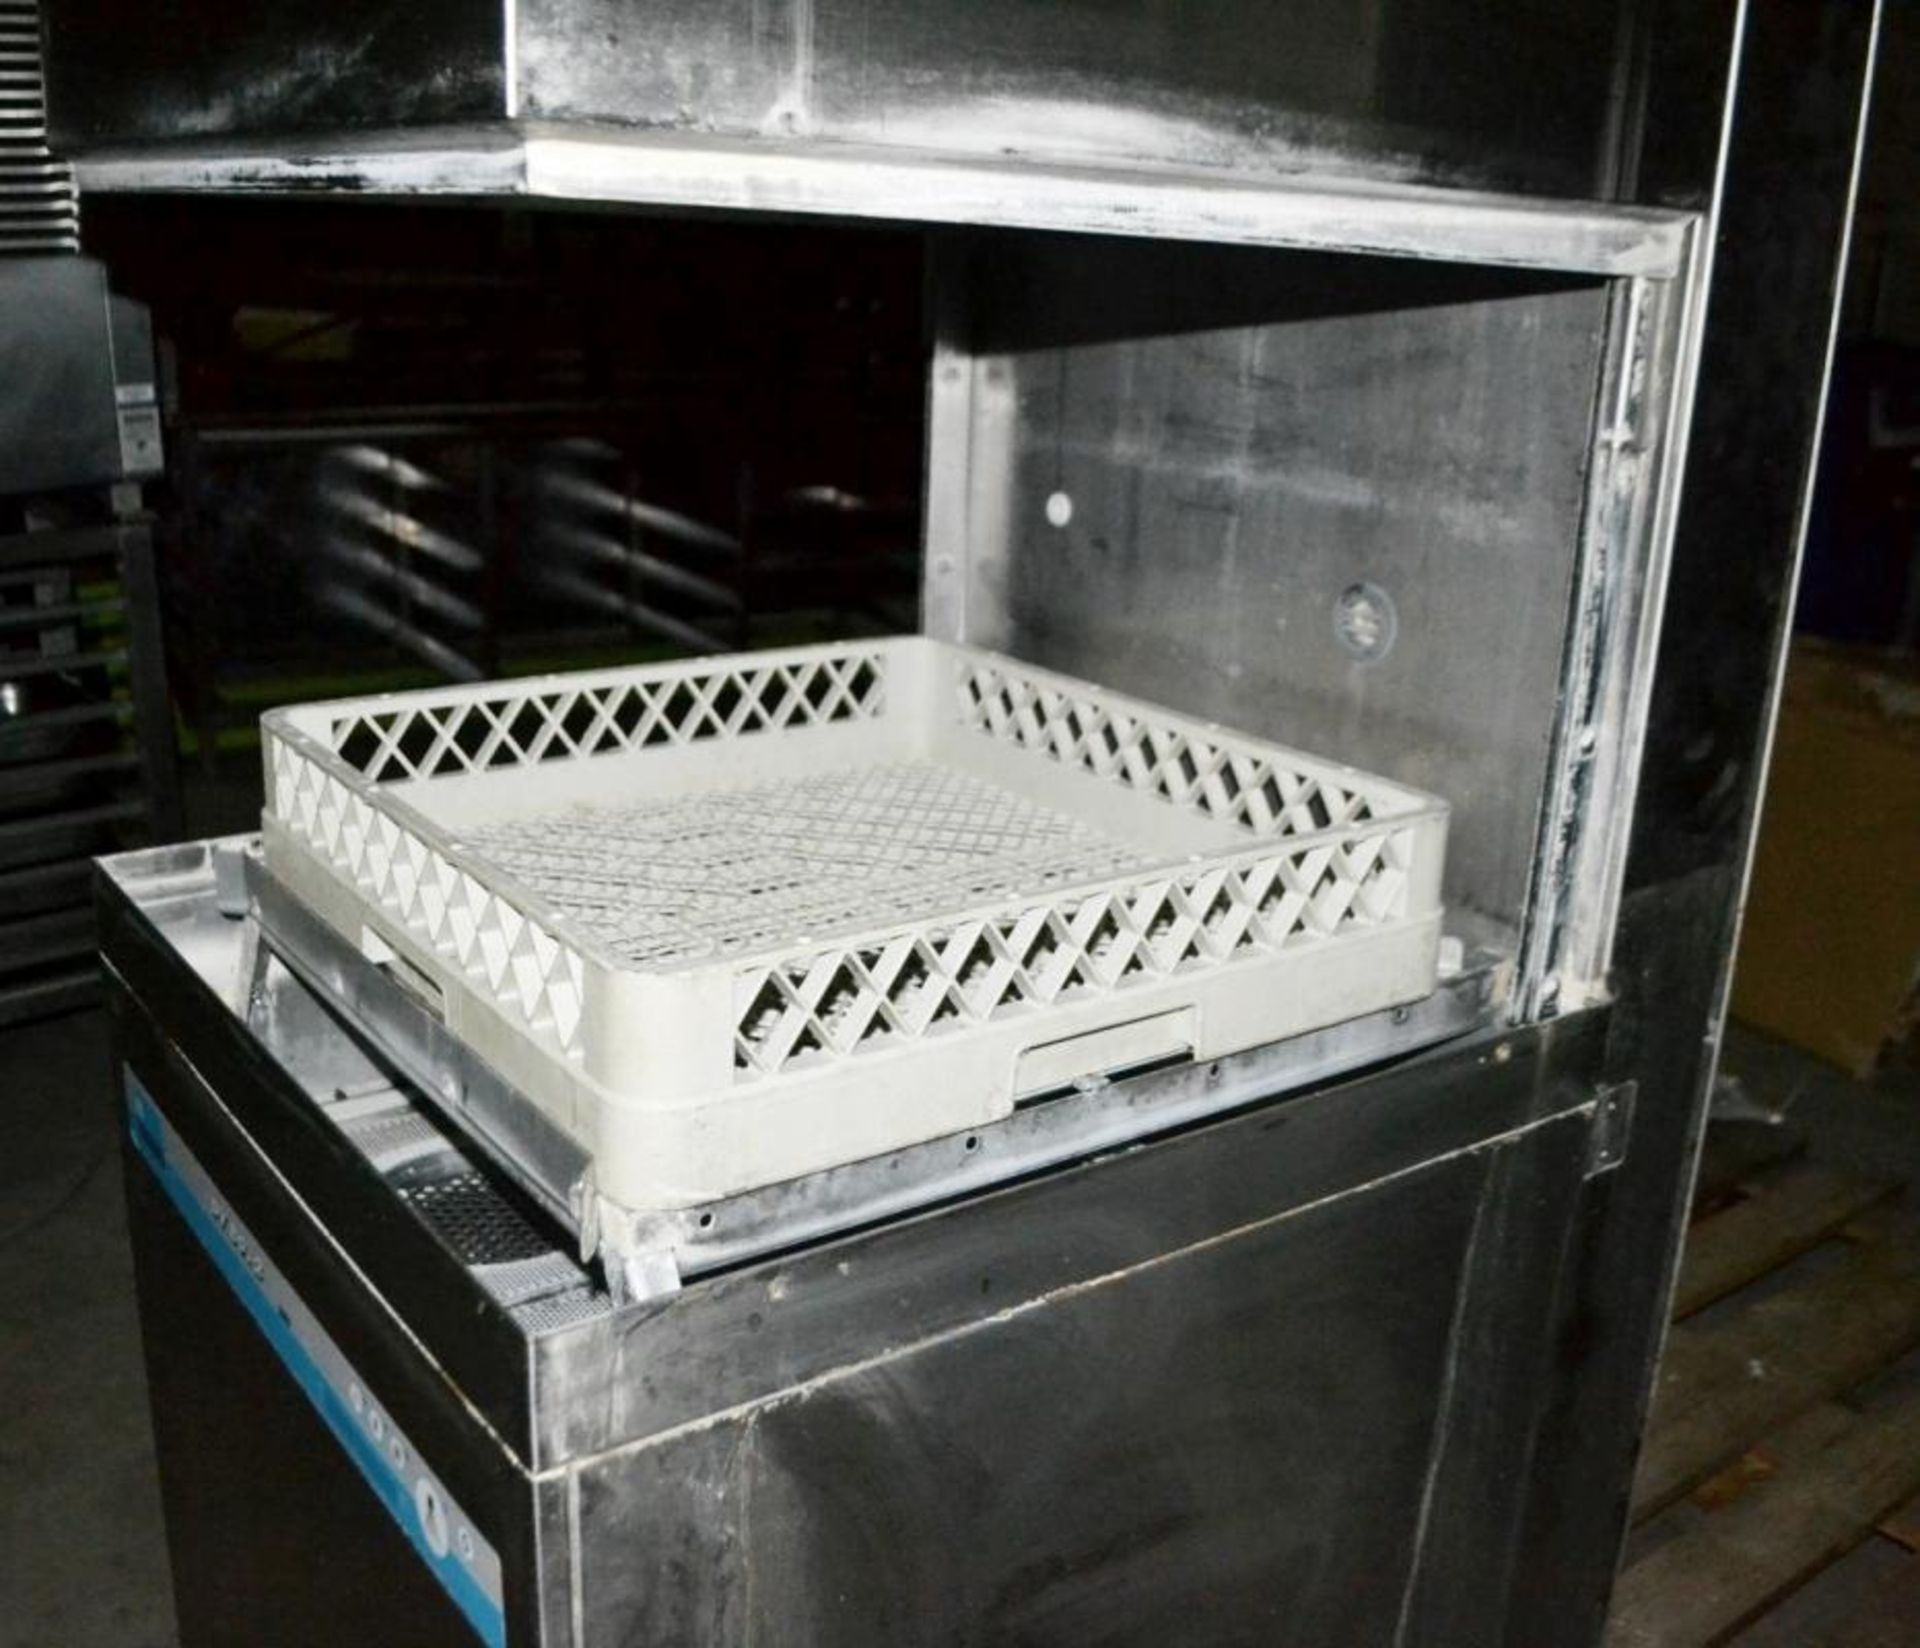 1 x MEIKO DV80.2 Pass Through Commercial Dishwasher - CL011 - Ref: 220 - Location: Altrincham - Image 3 of 5